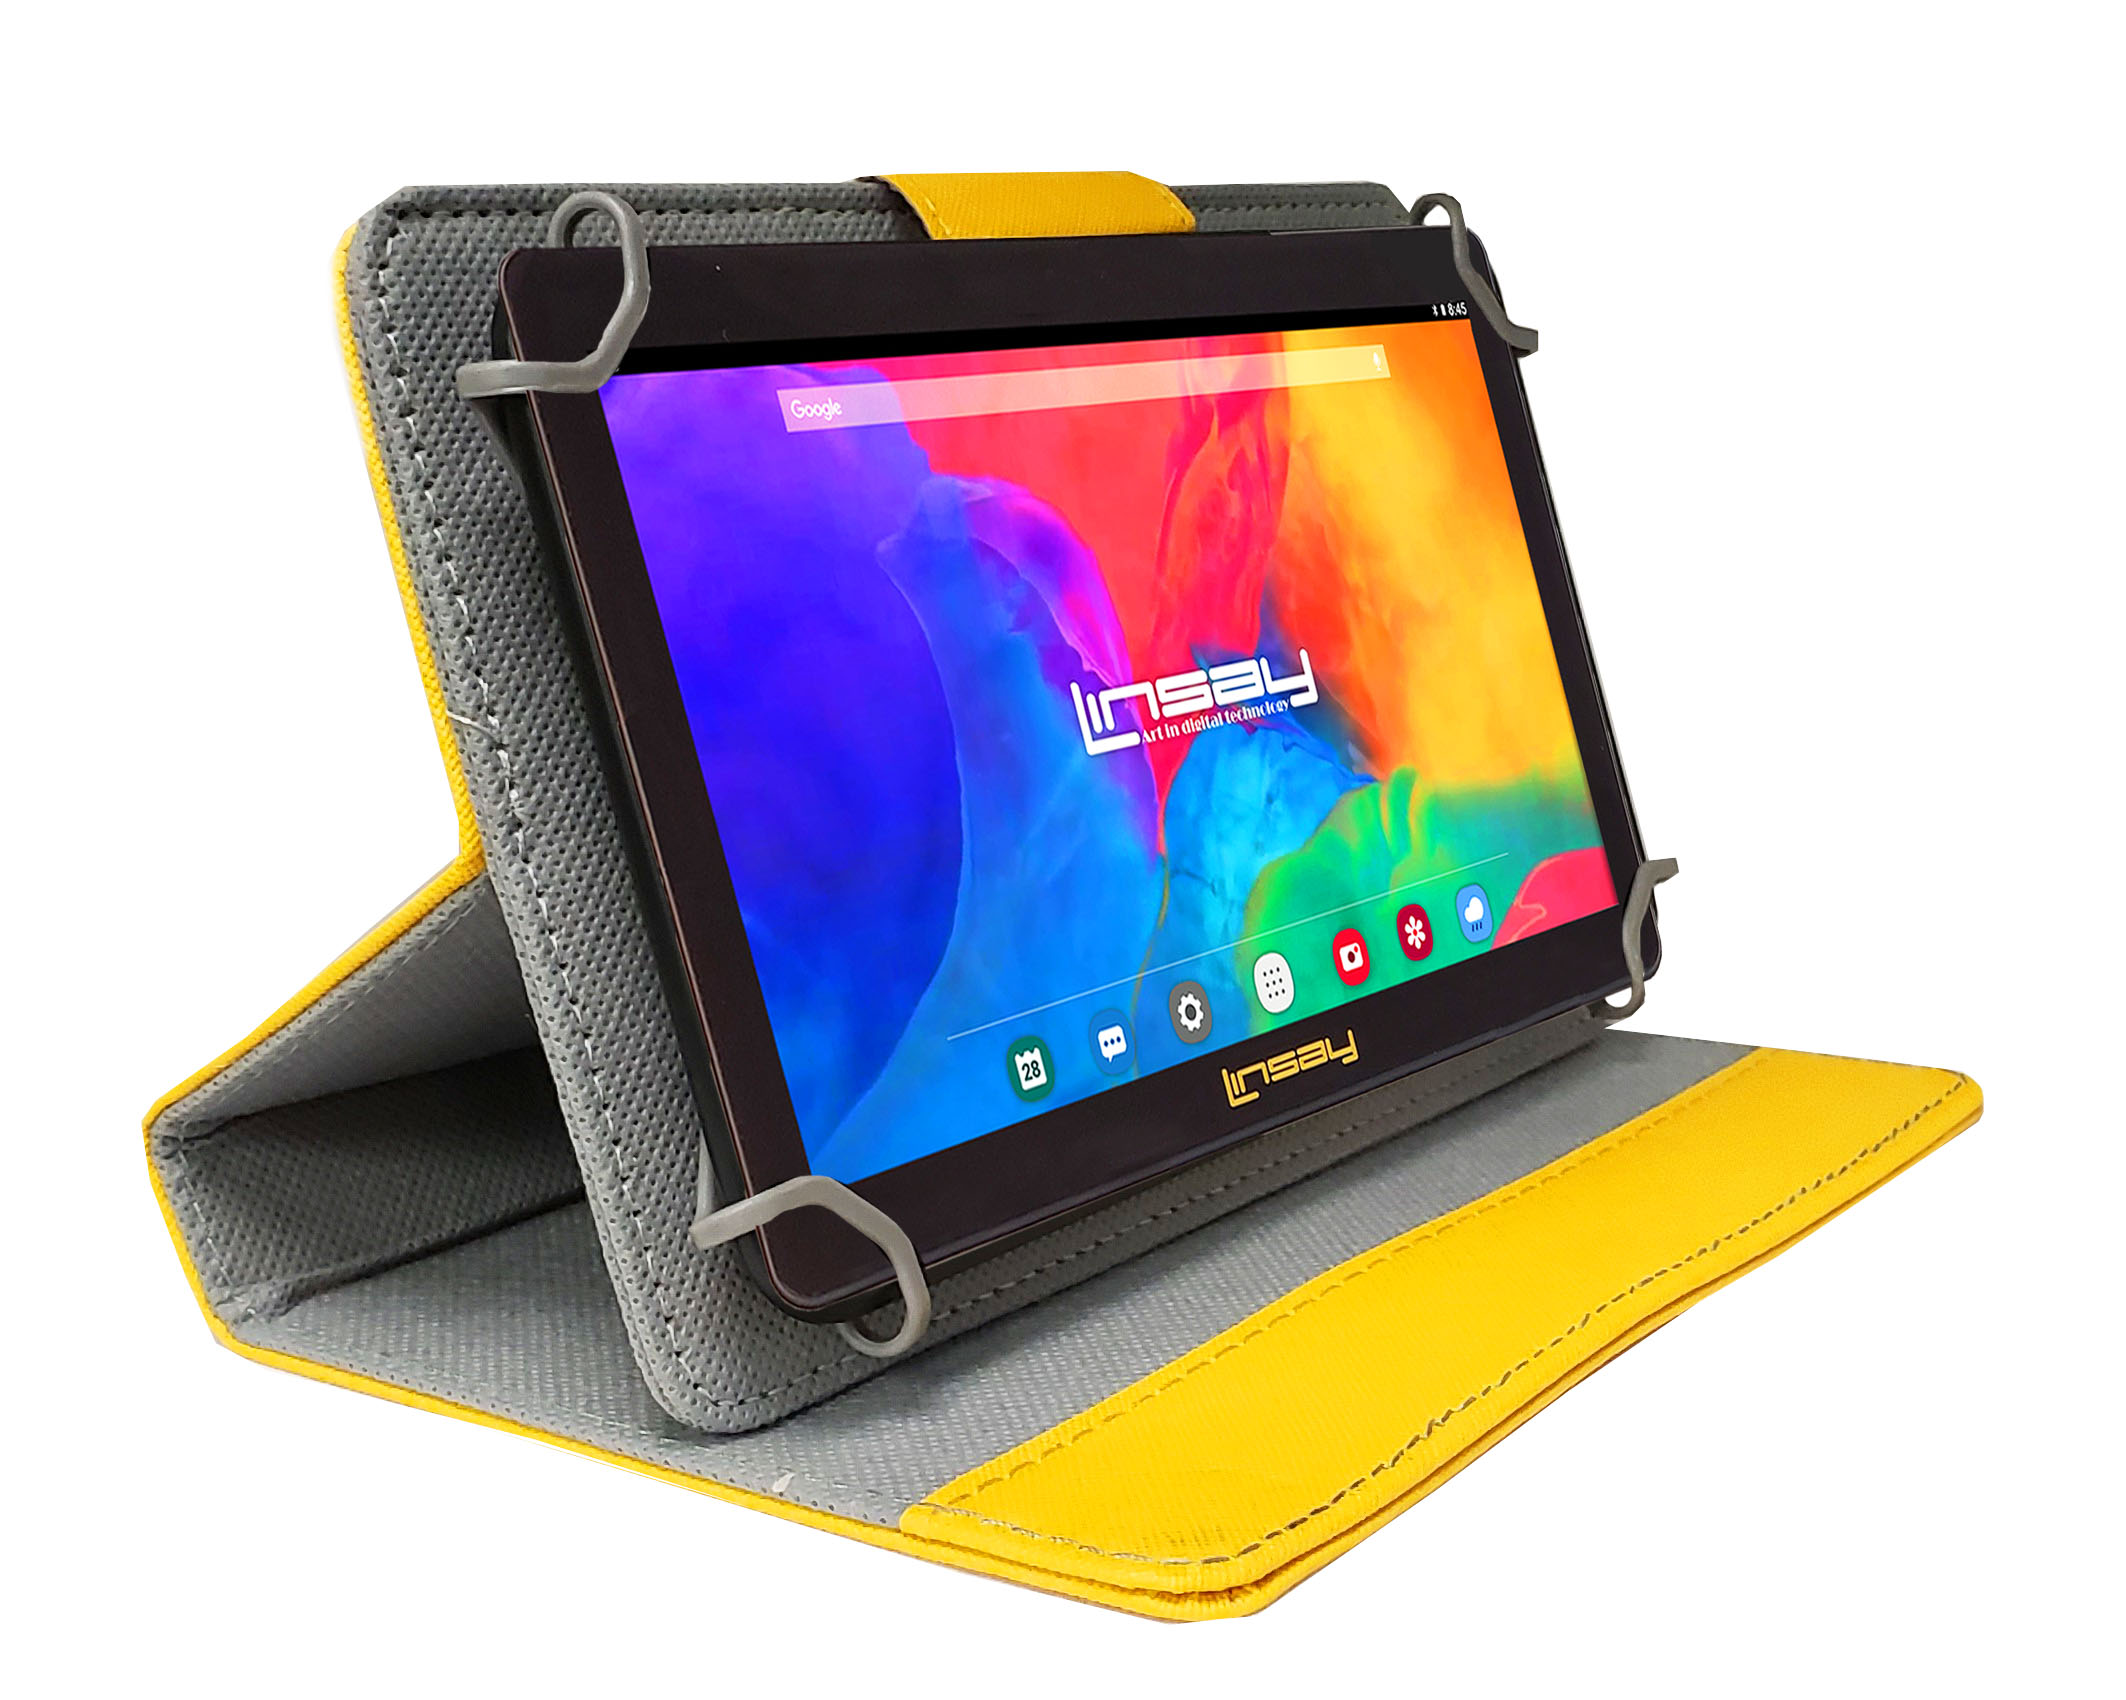 LINSAY 7" Quad Core 2GB RAM 32GB Storage Android 12 WiFi Tablet with case Yellow Leather Case - image 3 of 3